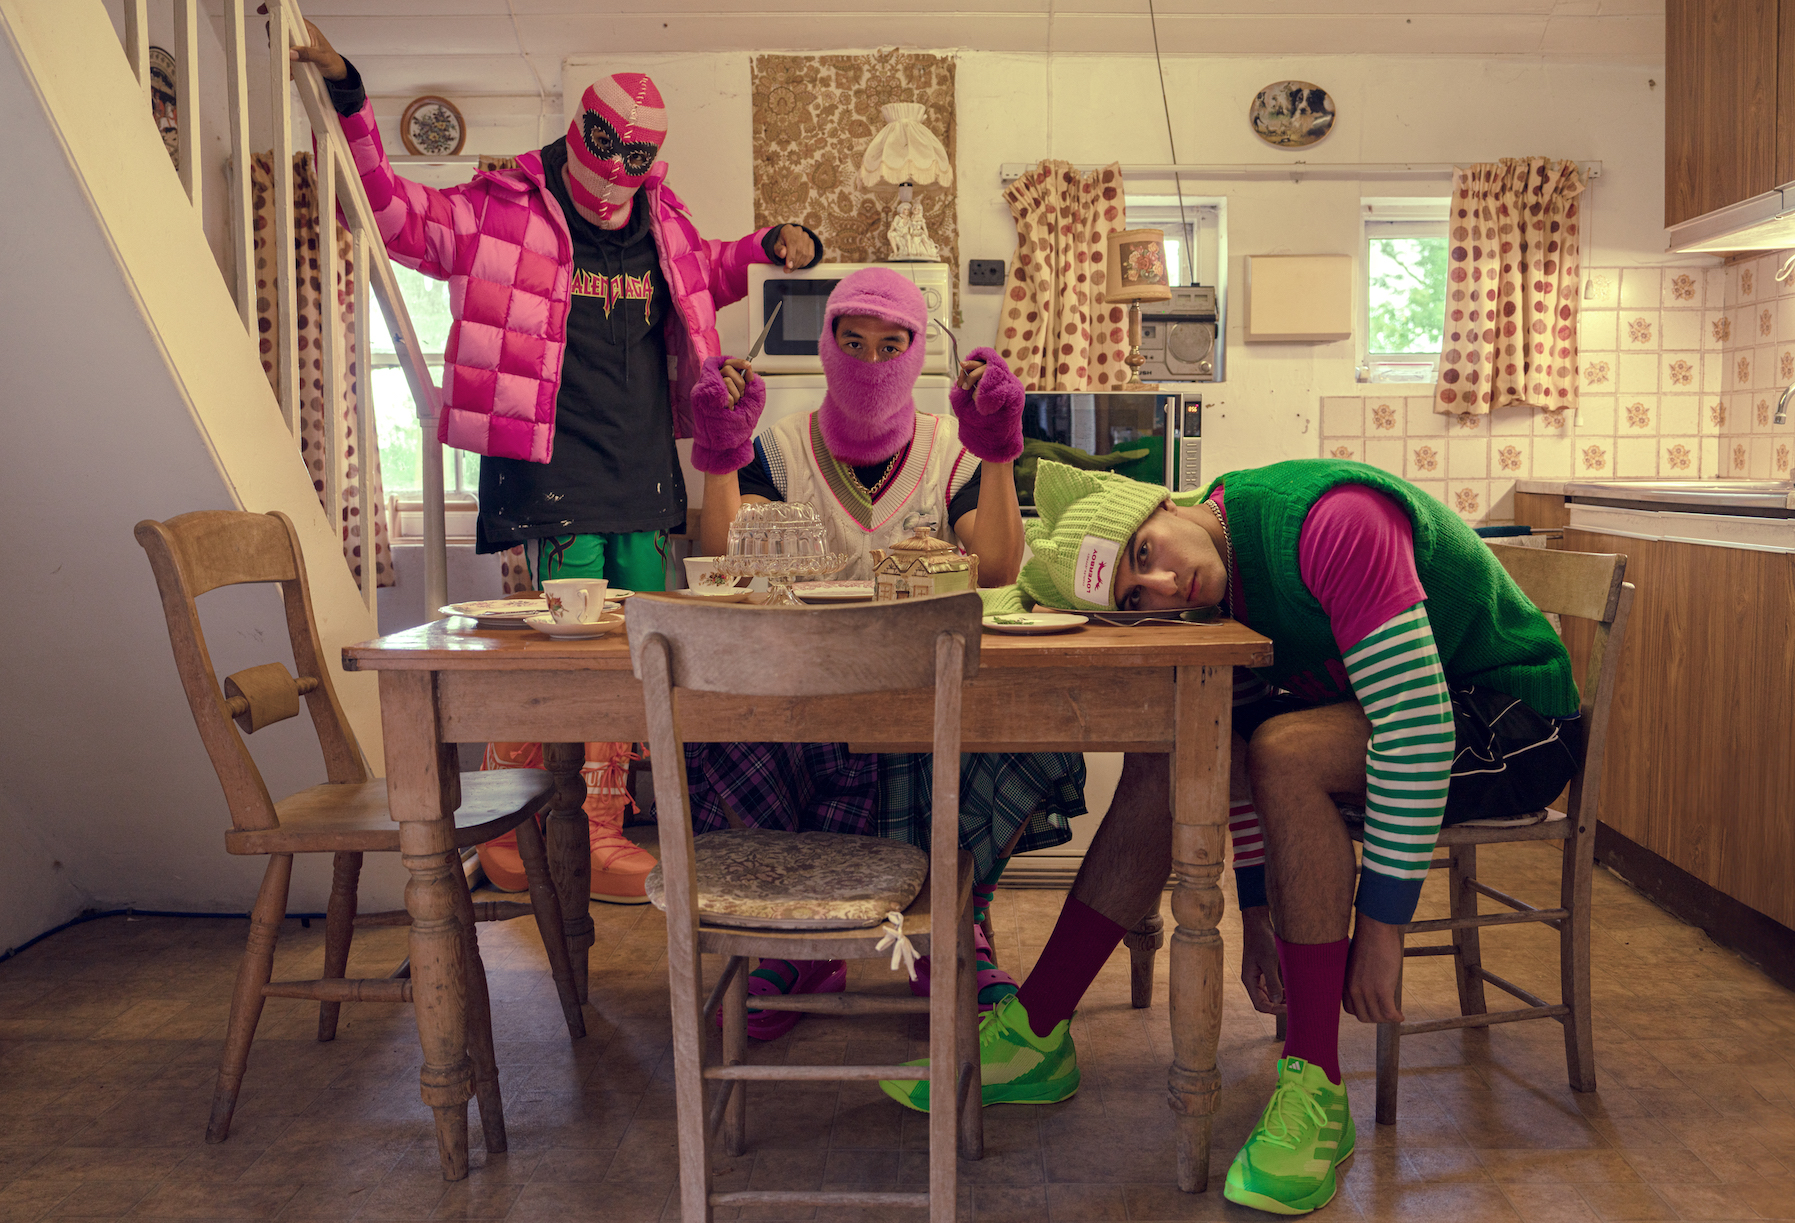 A stylised editorial shot of 3 people at a kitchen table, they are wearing neon hats and balaclavas and one has their head on the table while the others pose with arms up